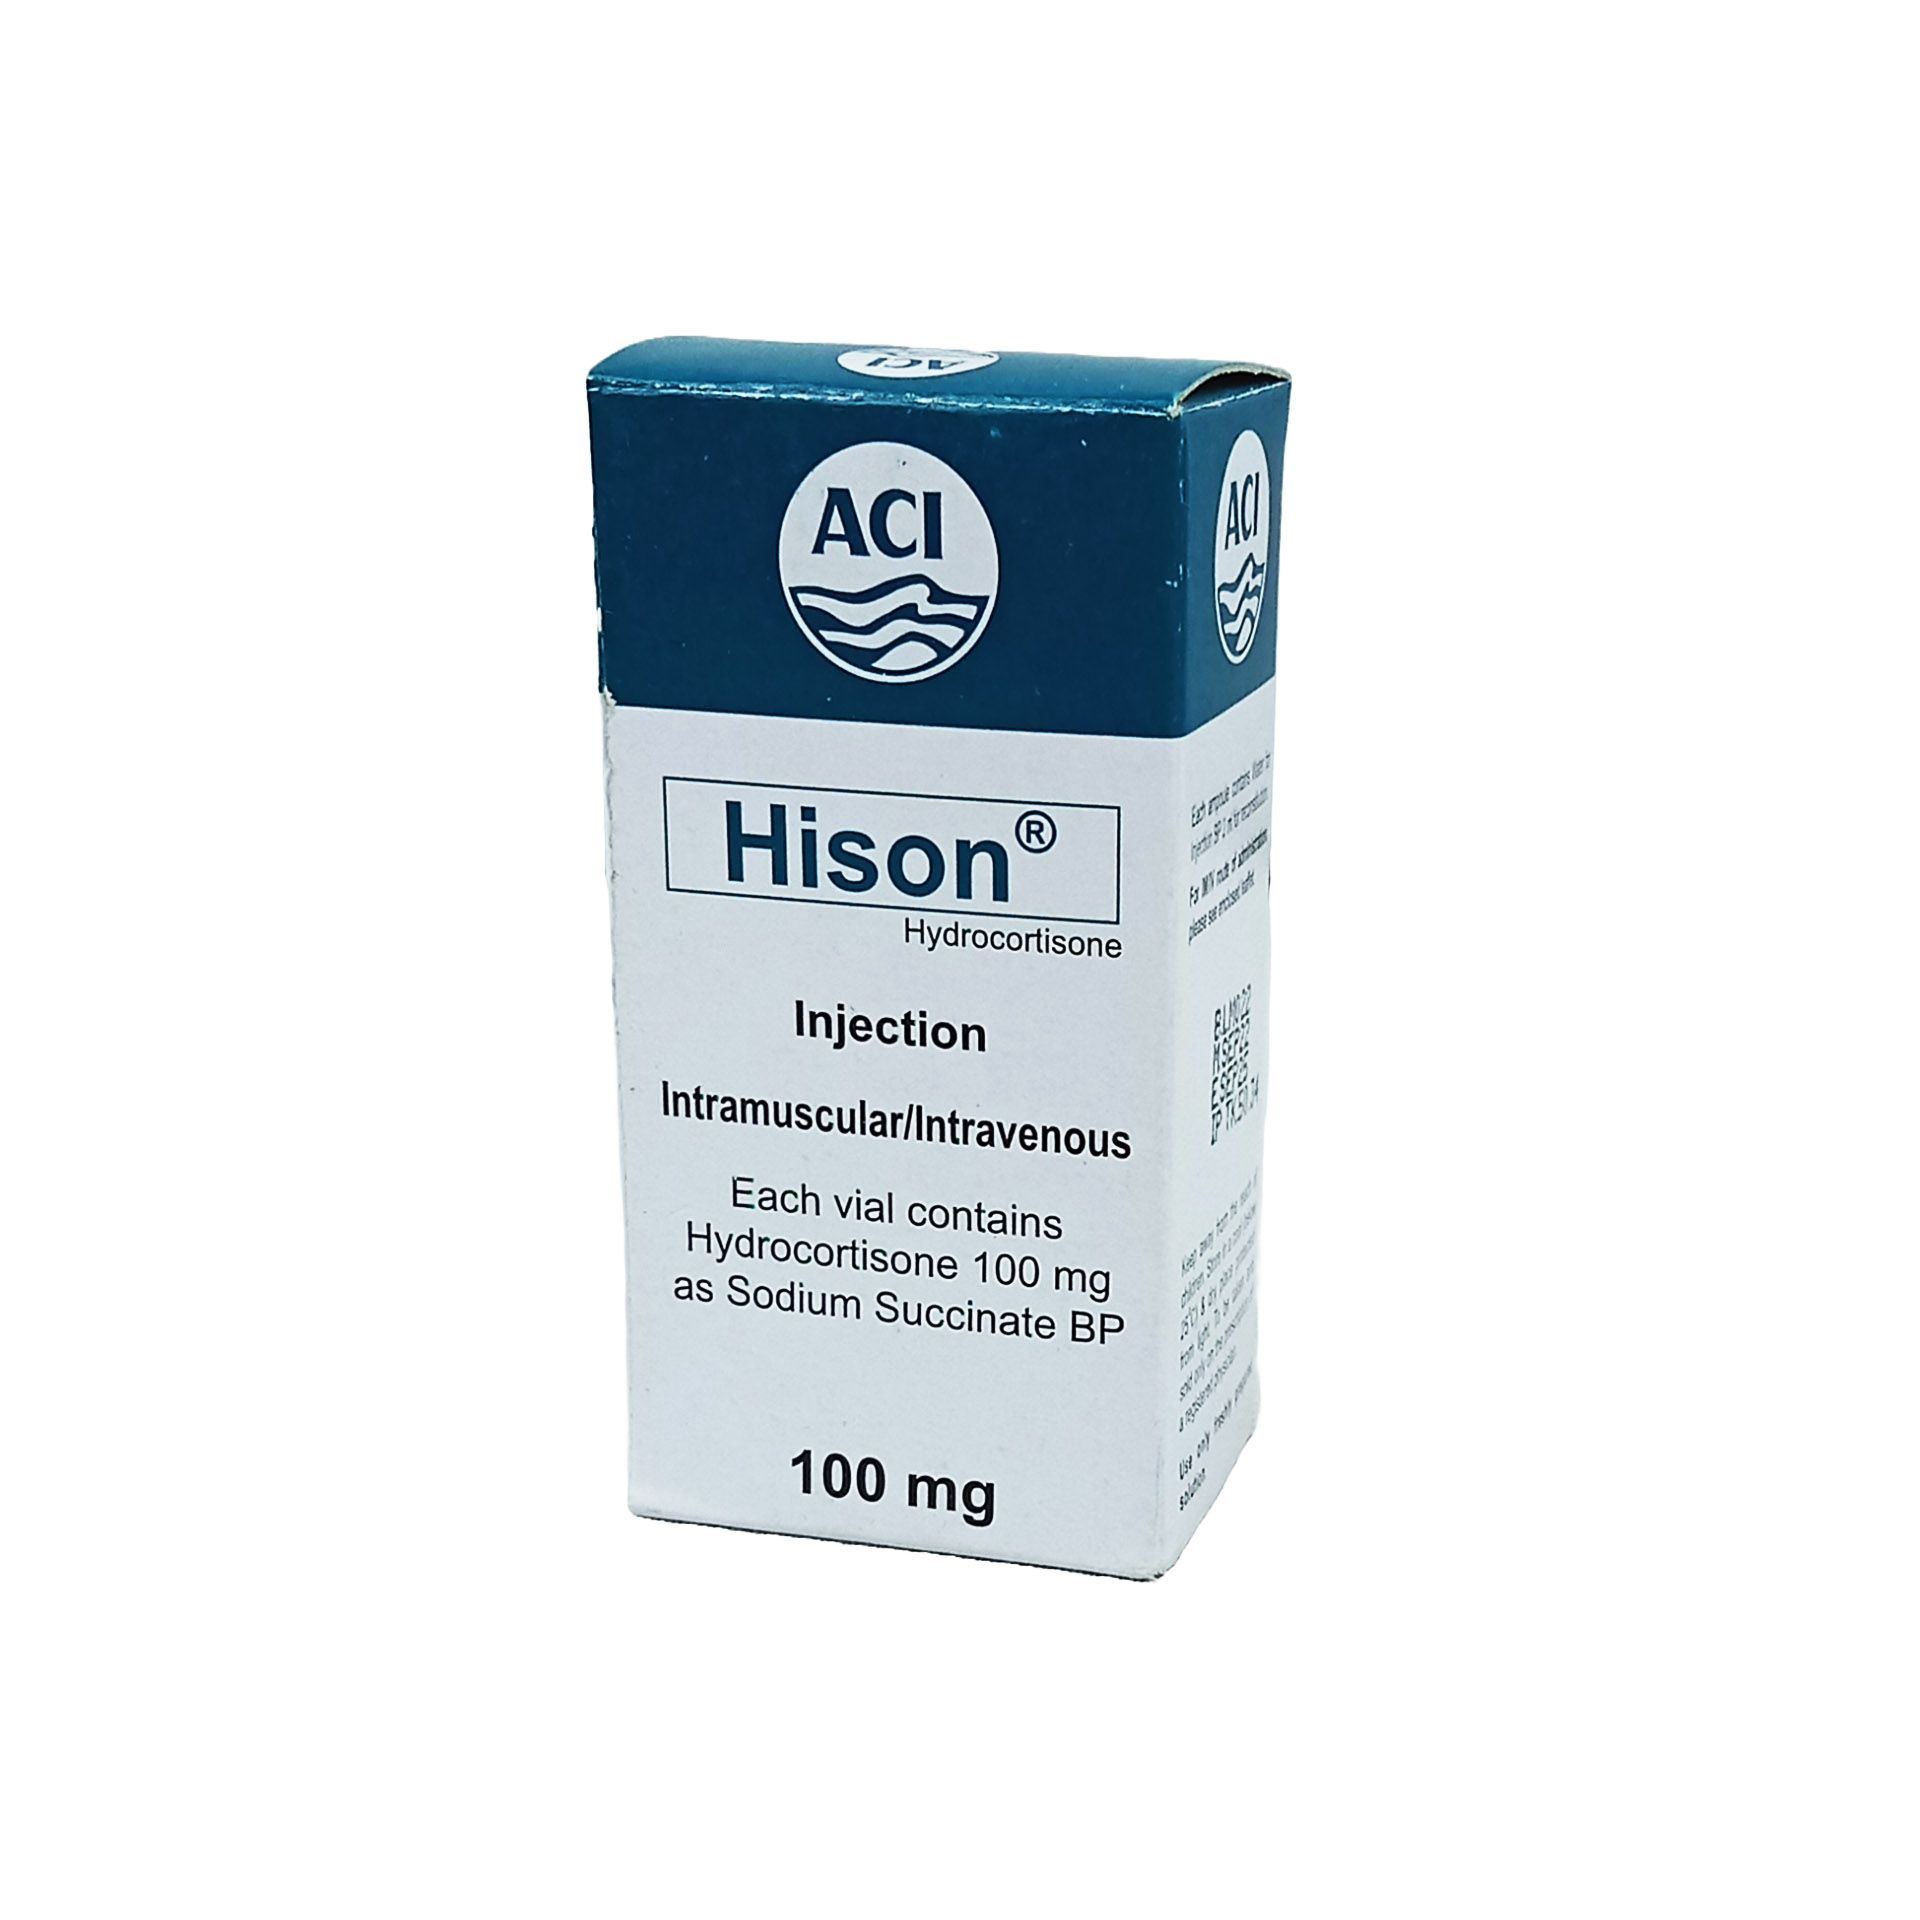 Hison 100mg/2ml Injection